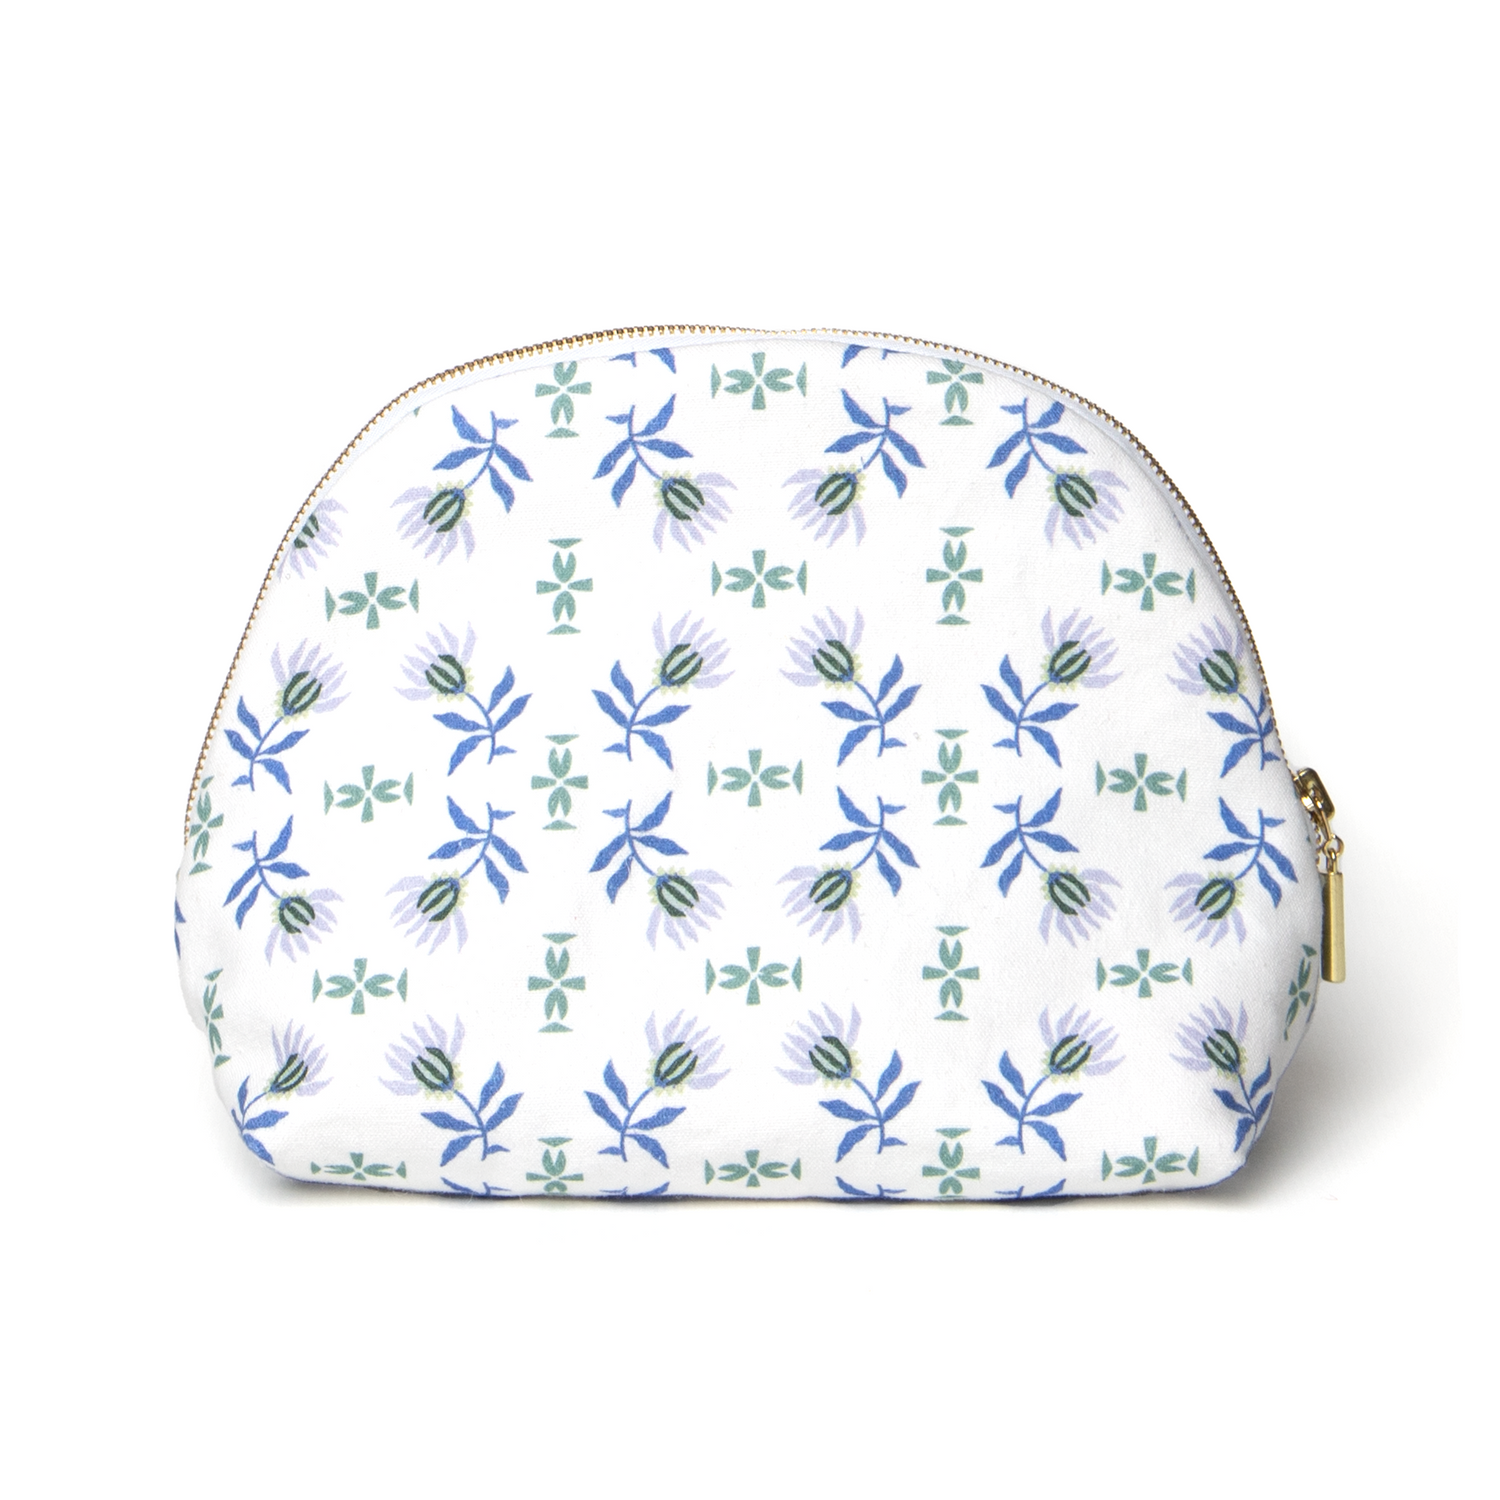 Blue & Green Floral Printed Pouch with gold zipper